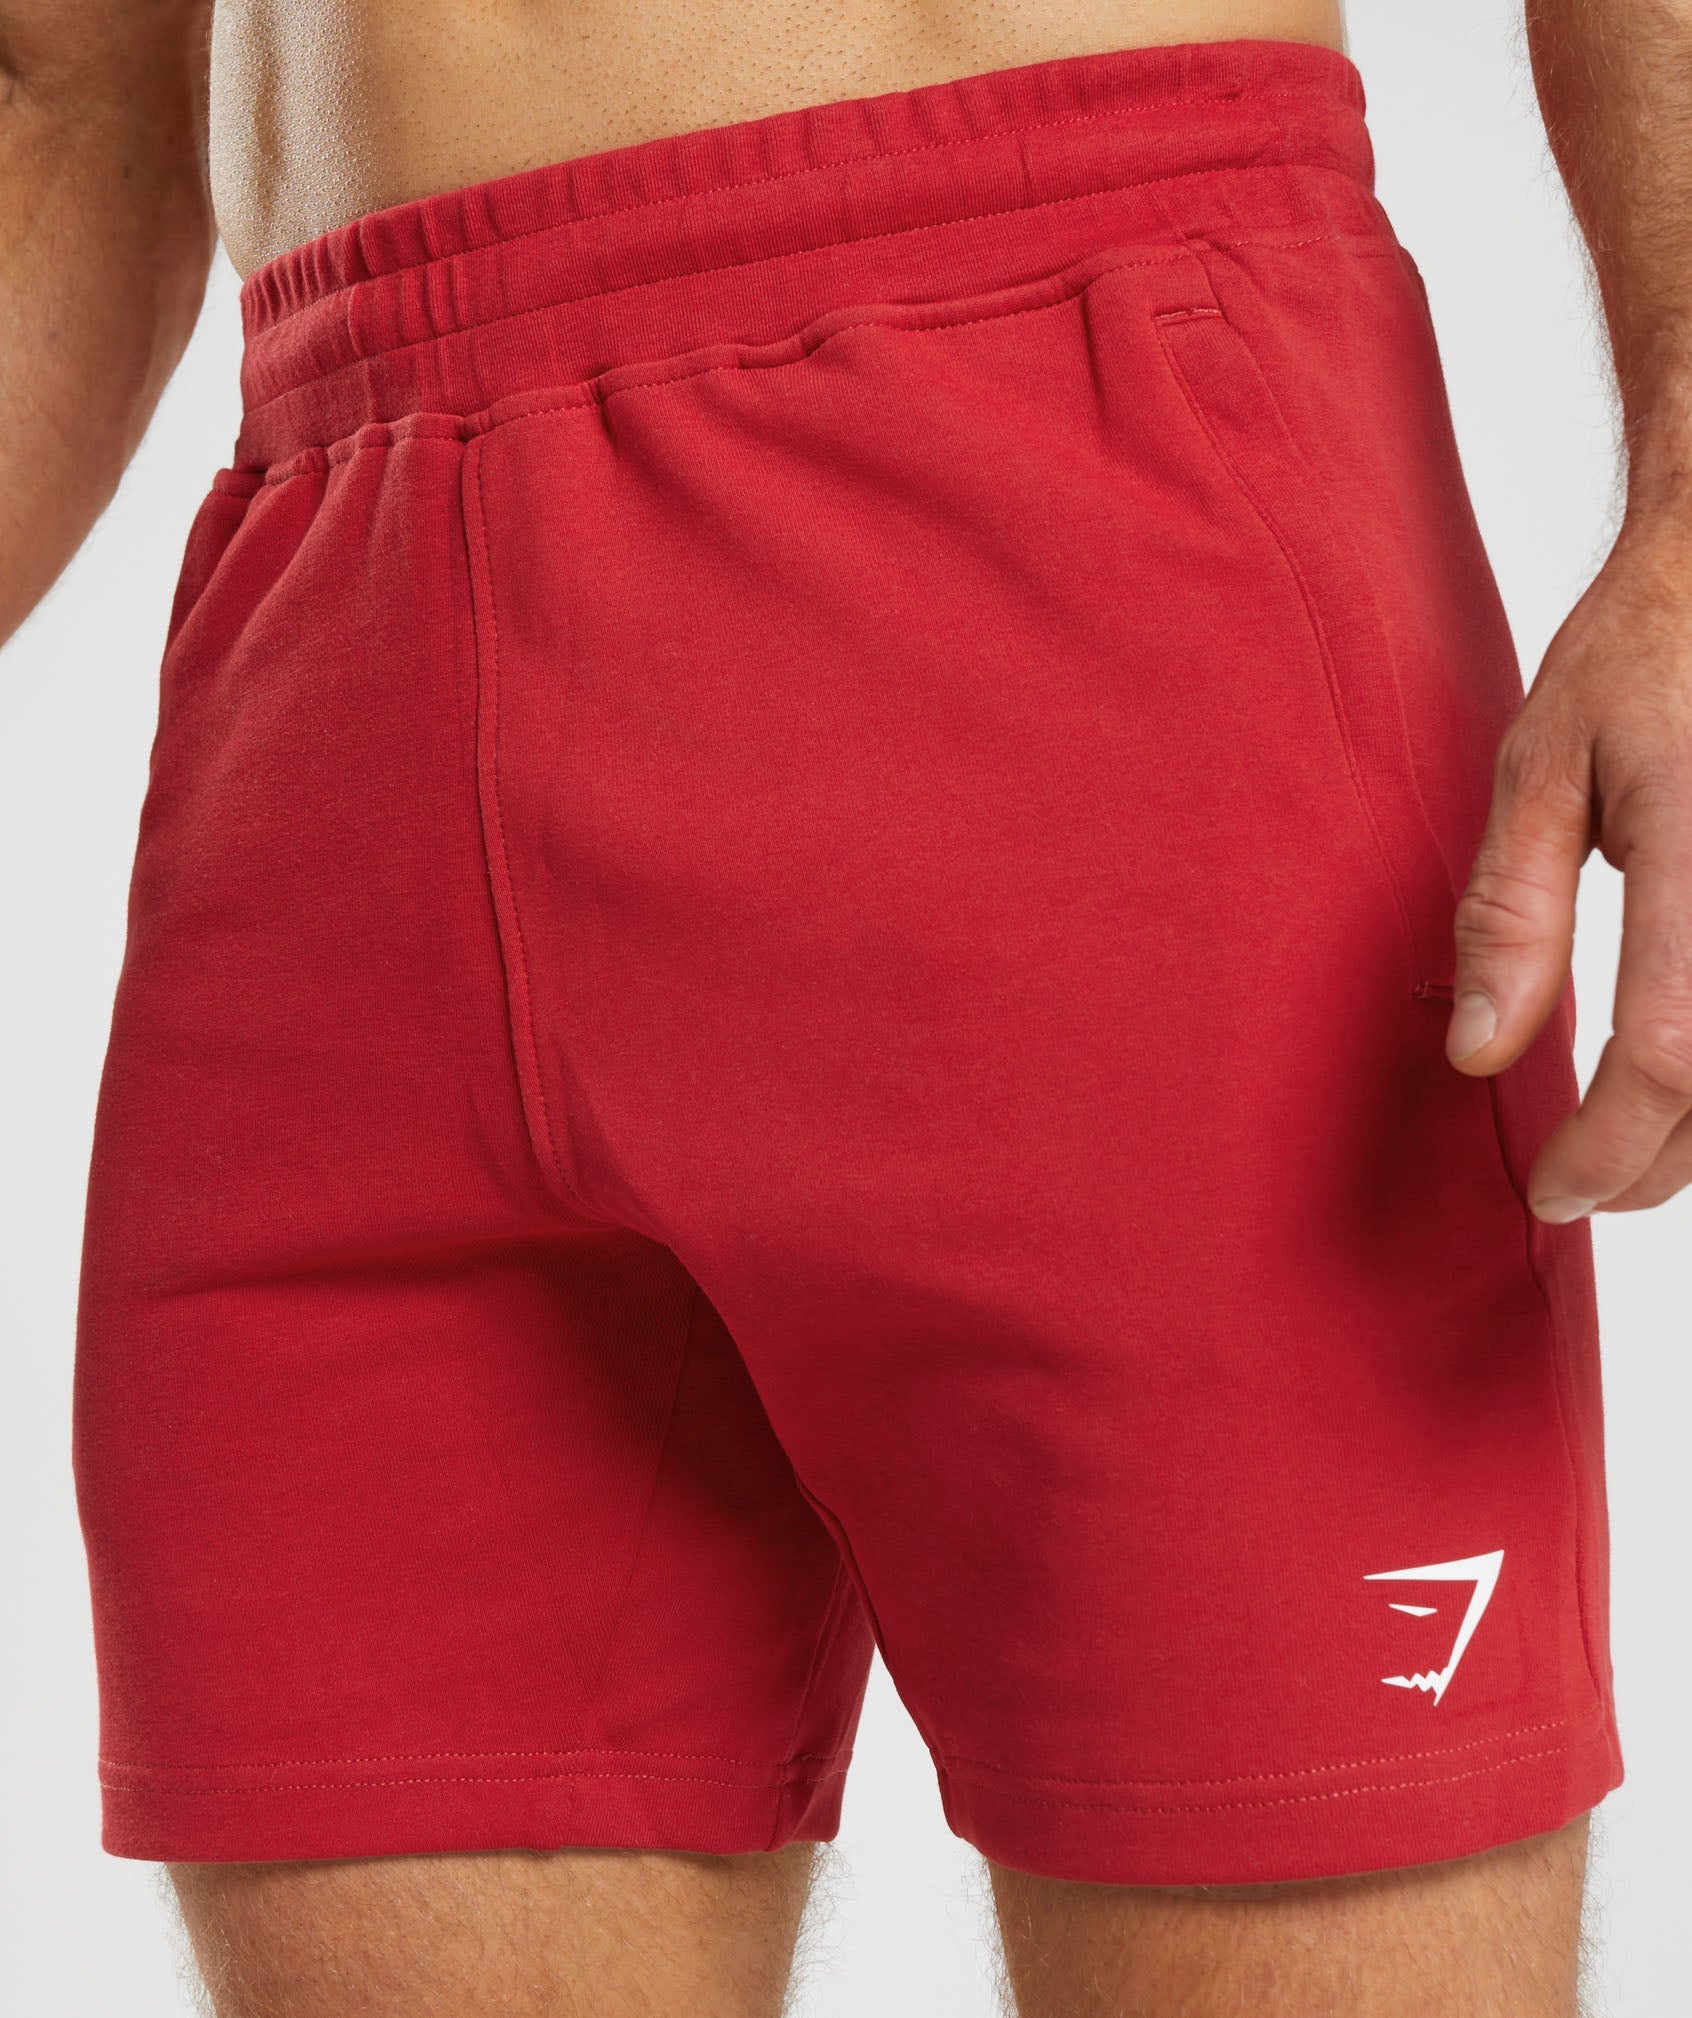 React 7" Shorts in Salsa Red - view 6